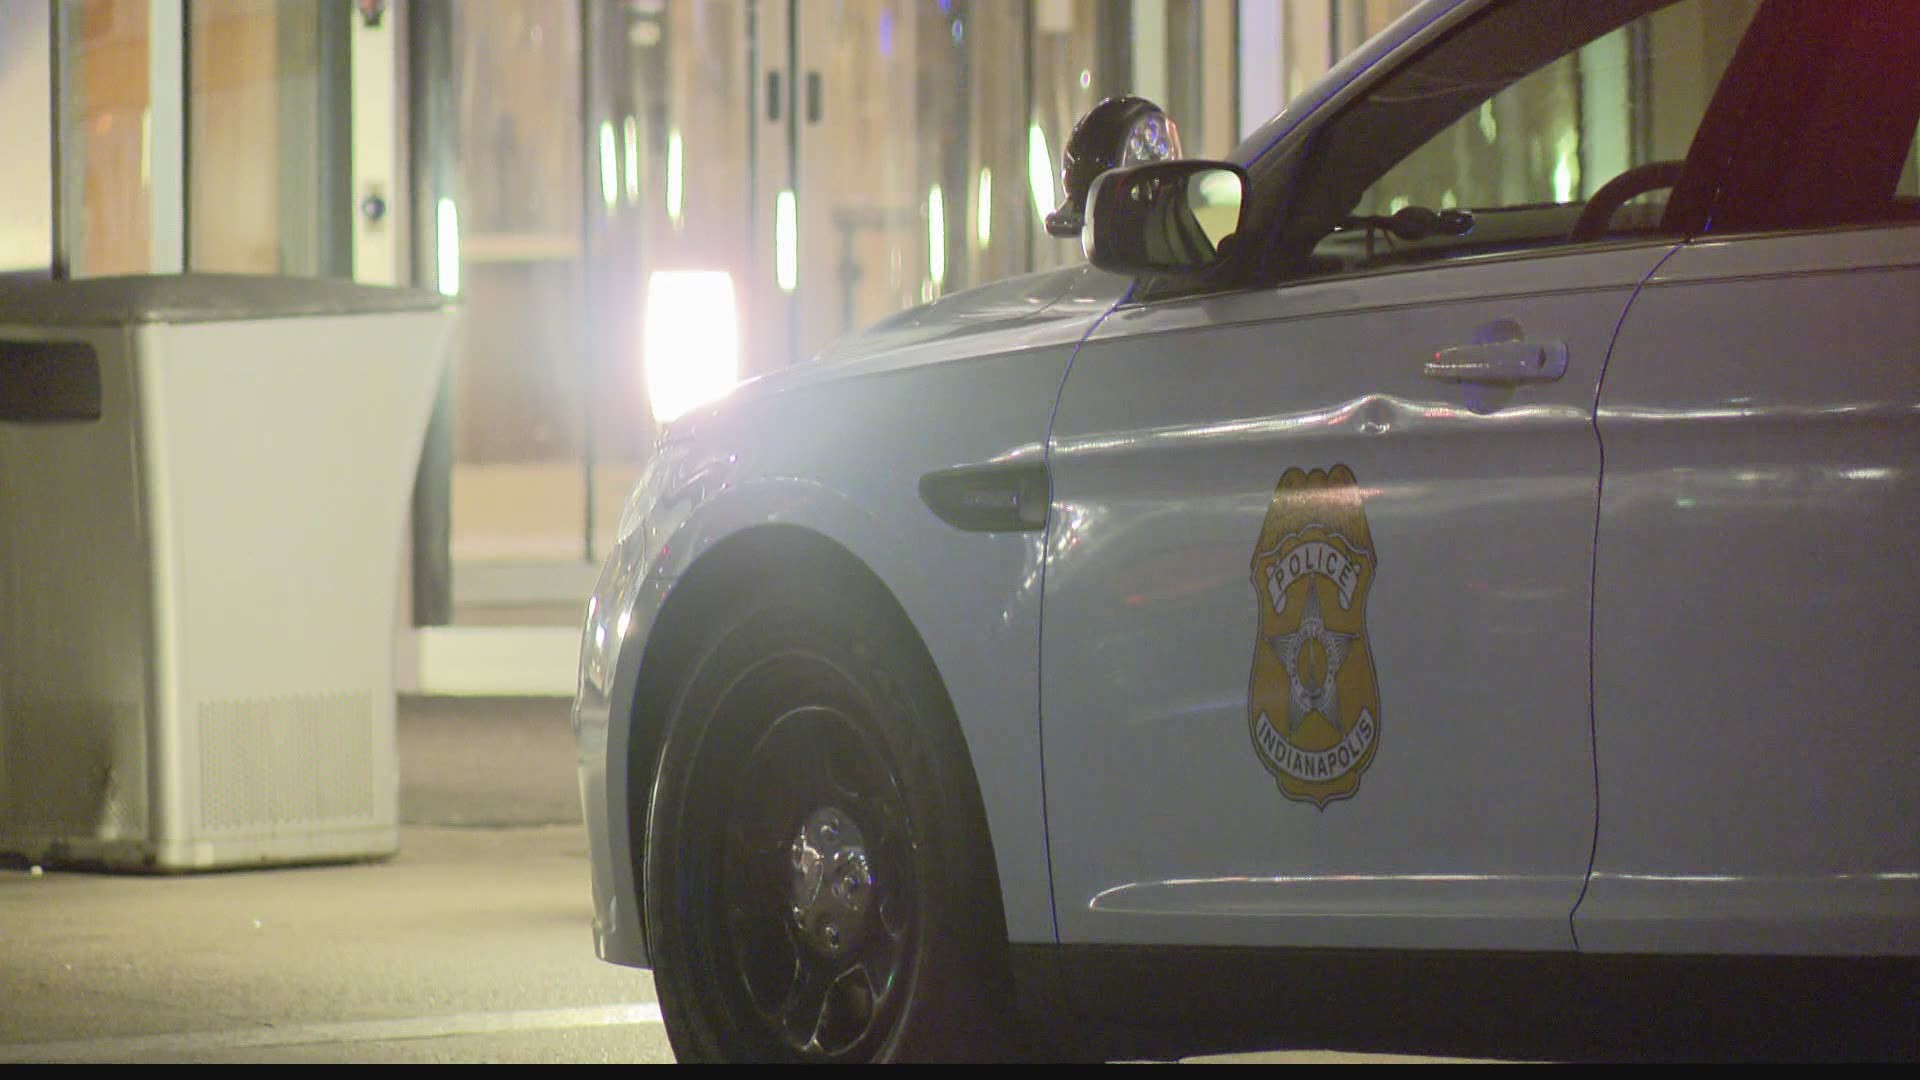 A 16-year-old girl was shot and killed at the JW Mariott hotel in downtown Indianapolis overnight.